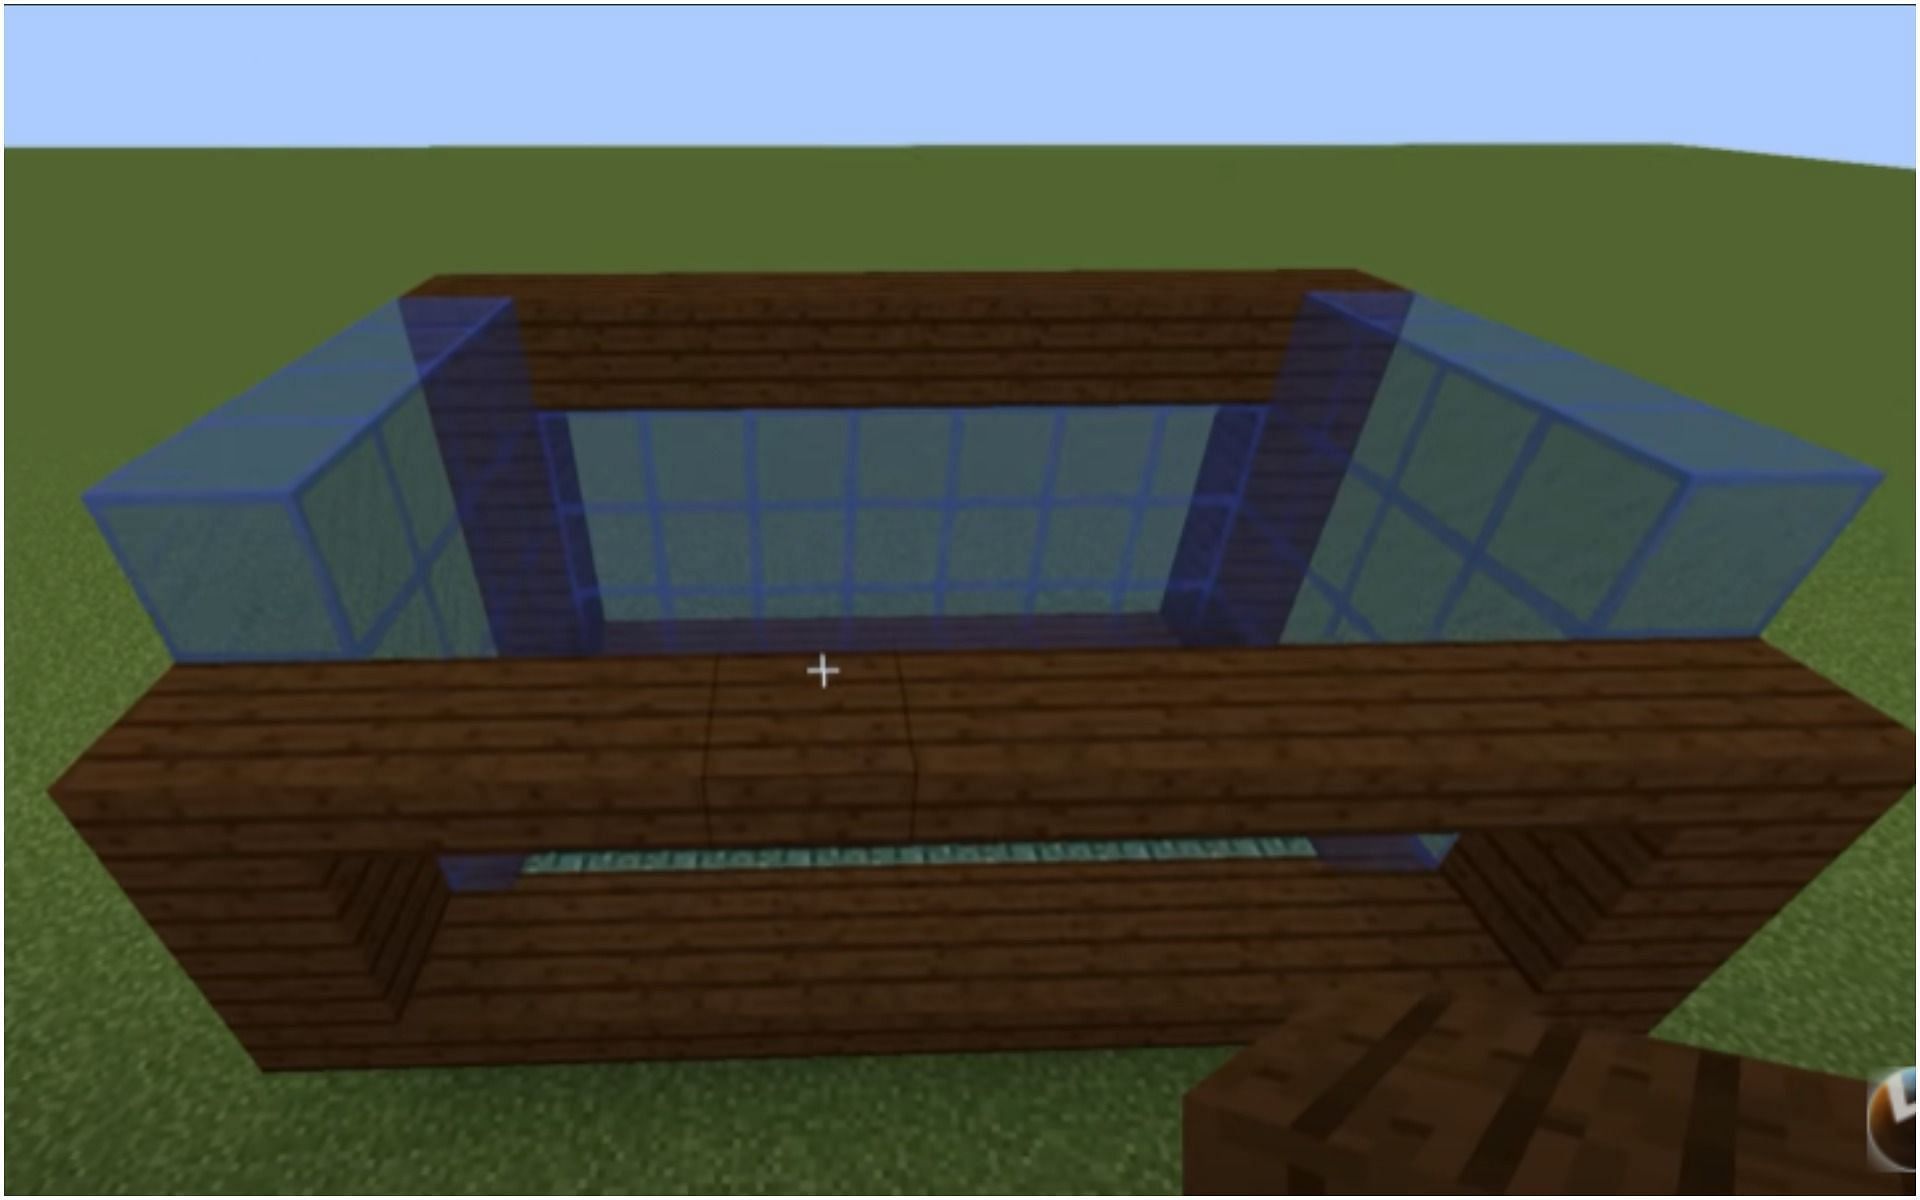 The frame of the farm enclosed in glass (Image via YouTube/stormfrenzy)